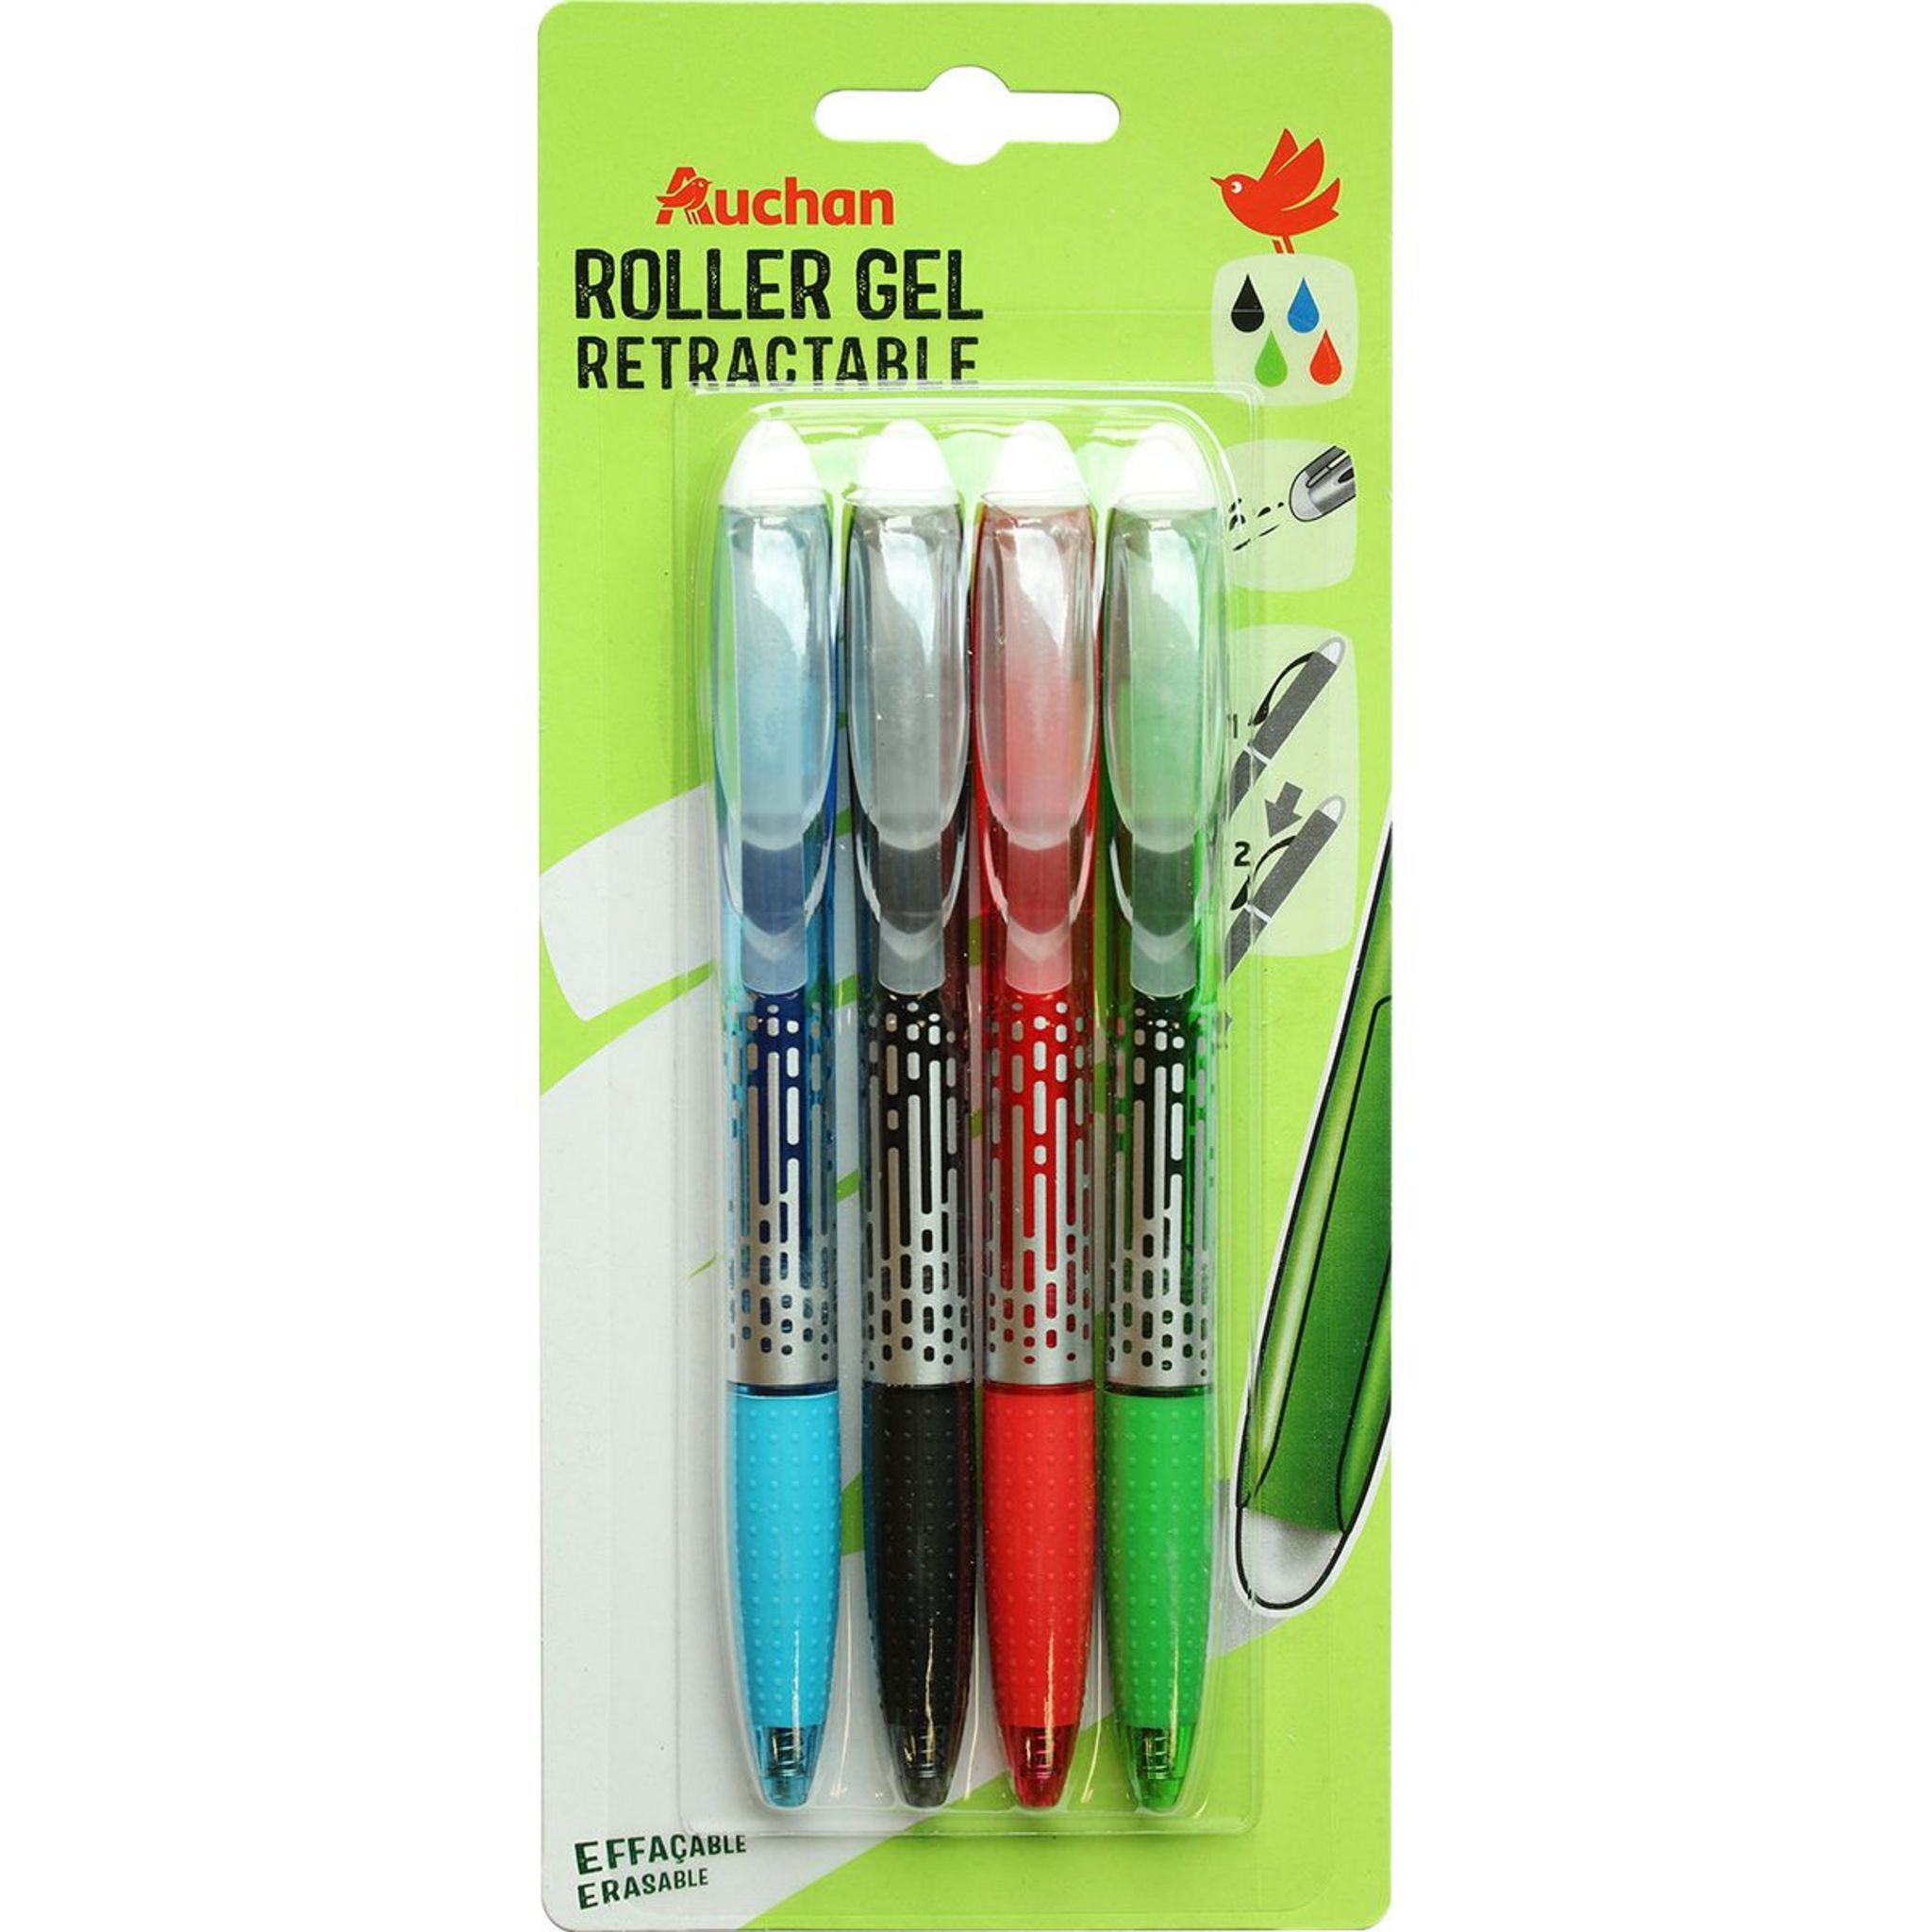 AUCHAN Stylo plume roller ball rechargeable + 2 cartouches coloris